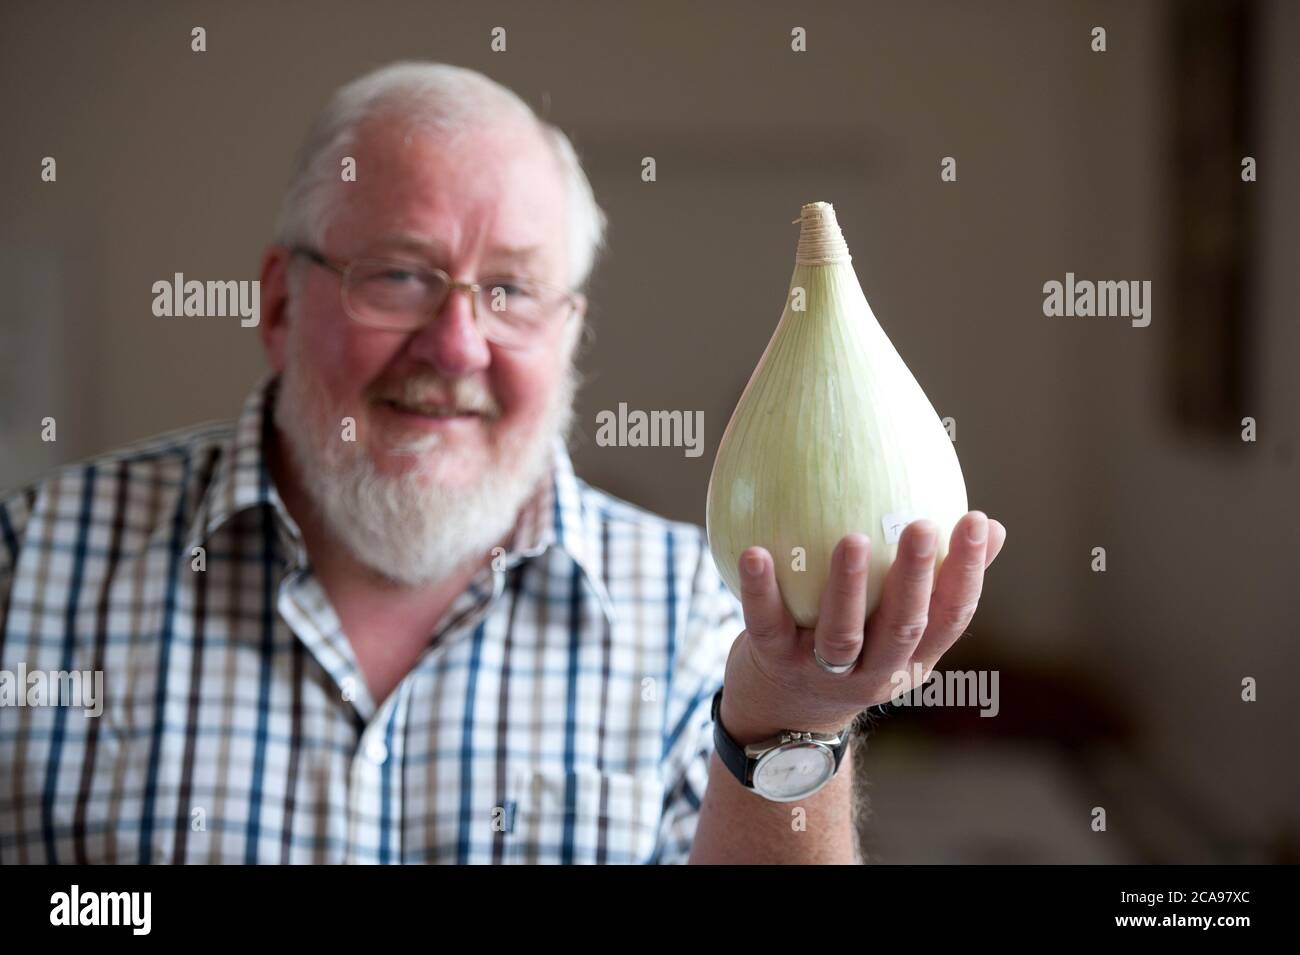 Penllergaer Gardening Club annual show at the Llewellyn Hall in Penllergaer, Swansea. Stuart Johns the Committee Chairman holds up a giant onion. Stock Photo